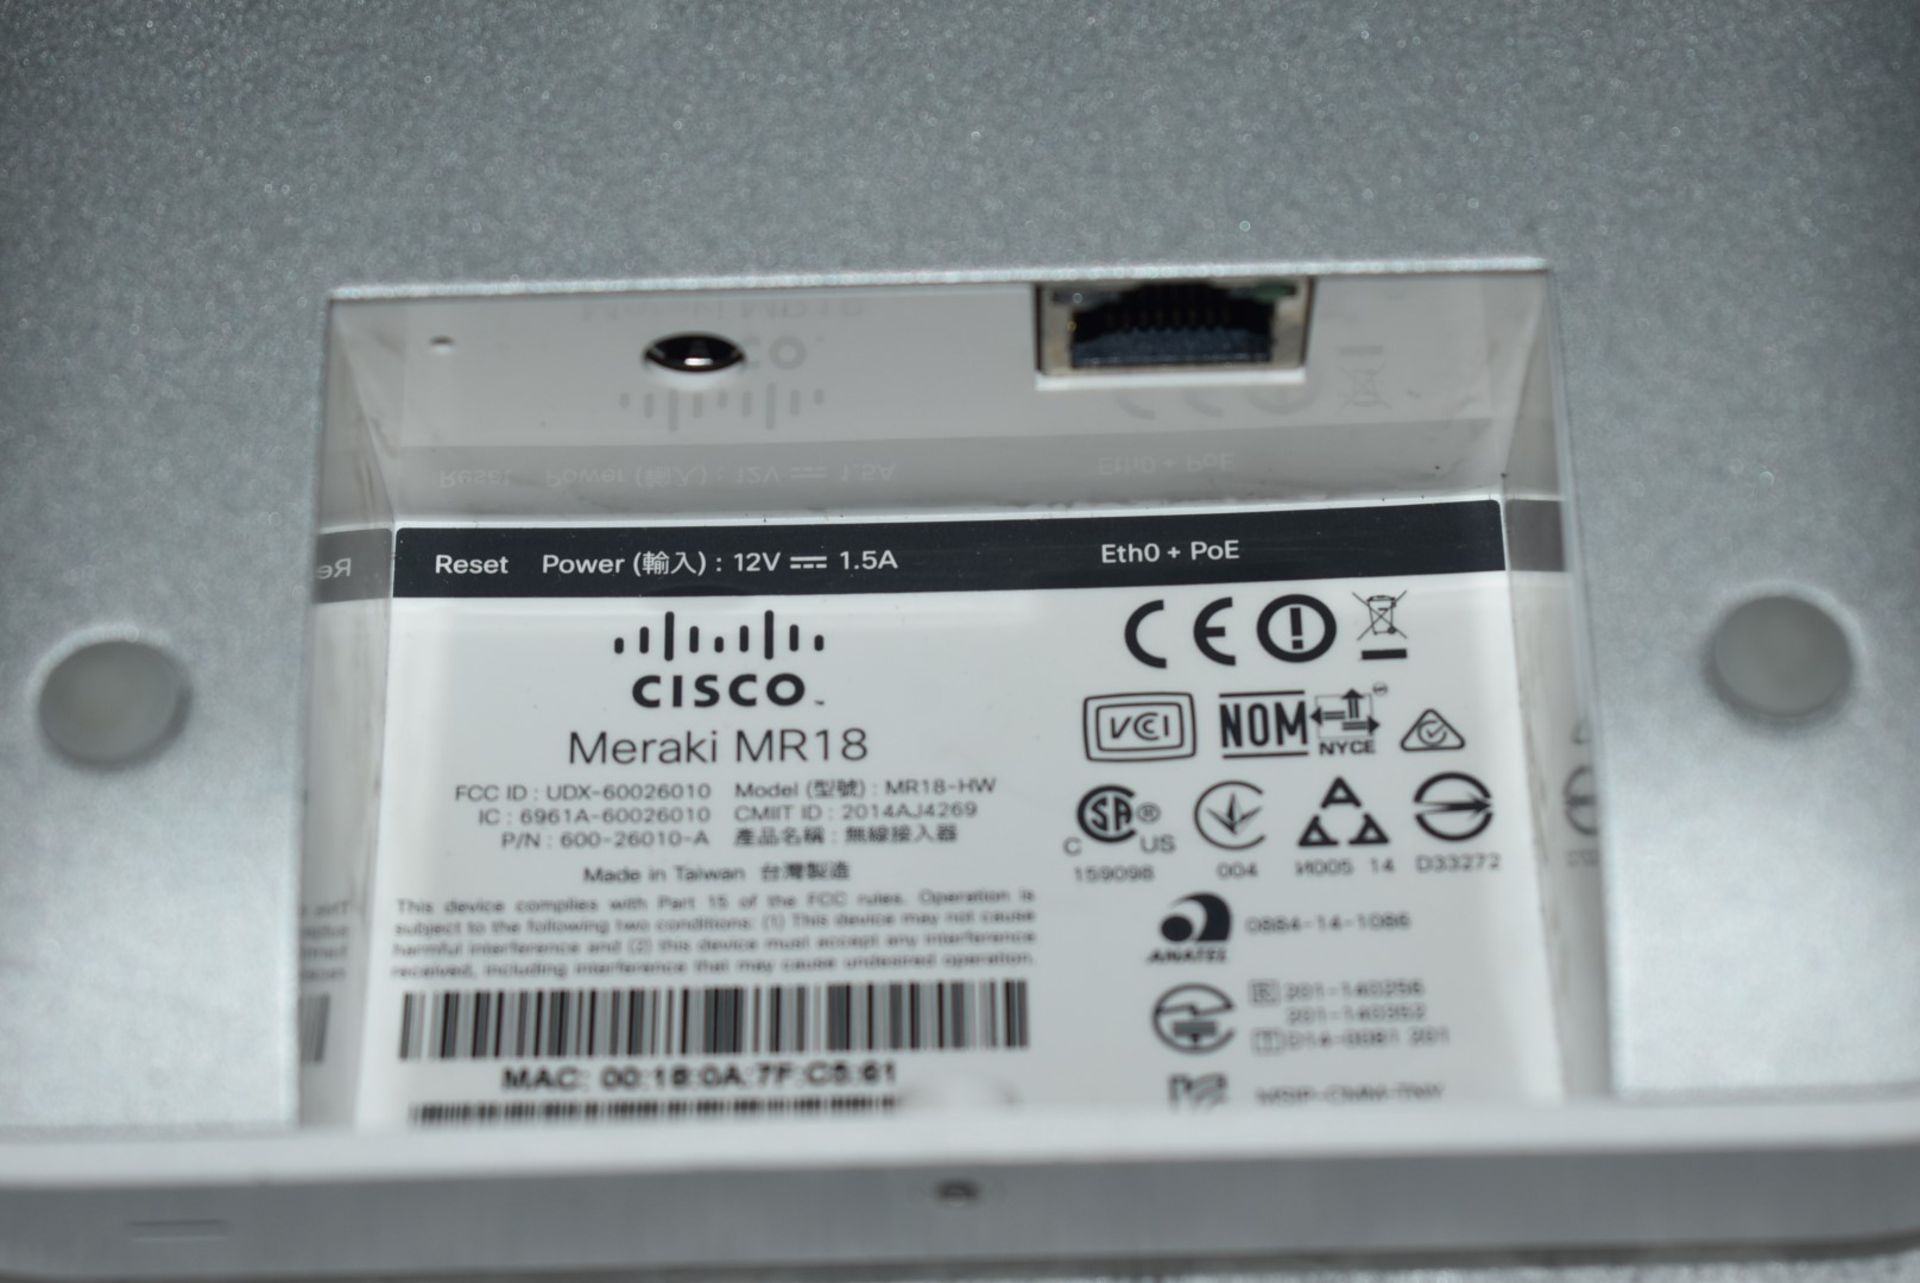 1 x Cisco Meraki MR18 Dual-Band Cloud-Managed Wireless Network Access Point - RRP £305 - Ref: MPC572 - Image 3 of 3